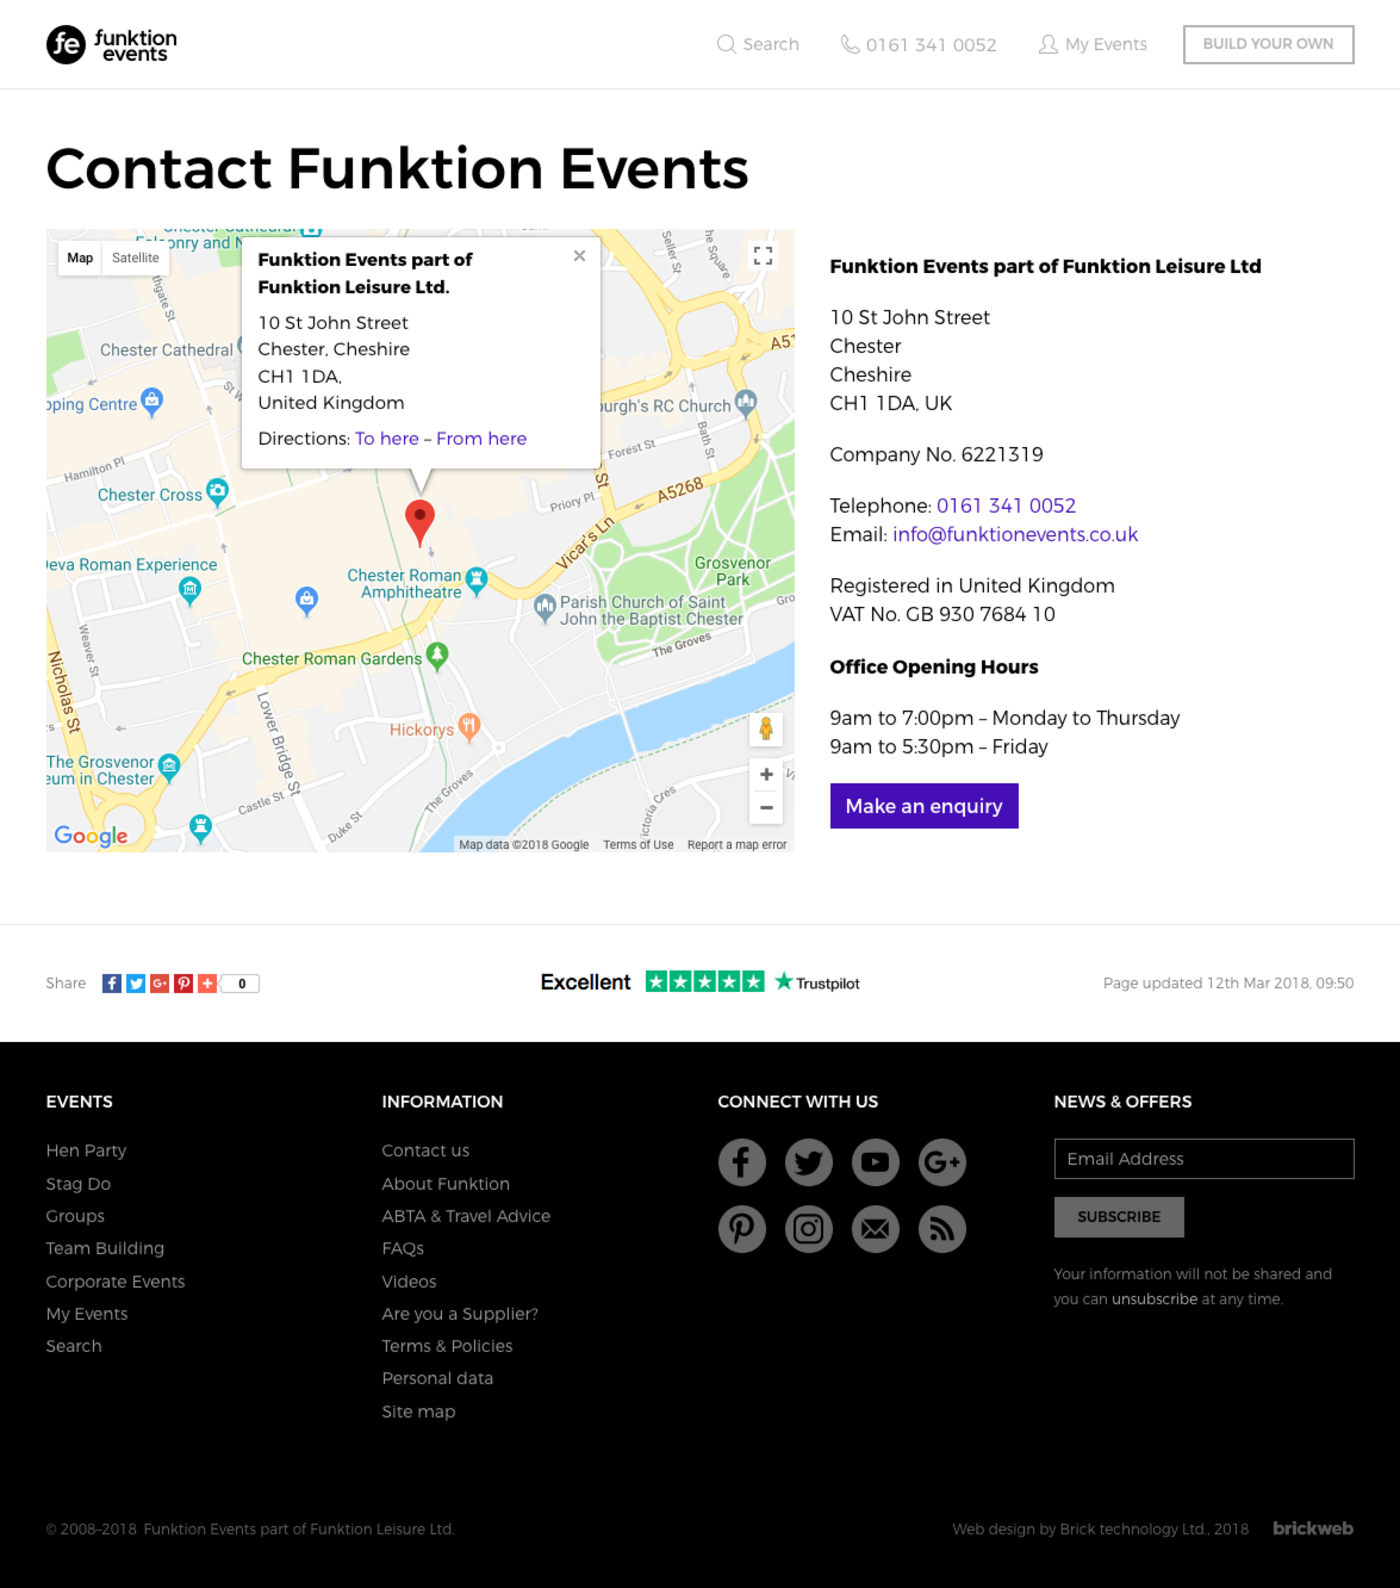 Funktion Events Contact us